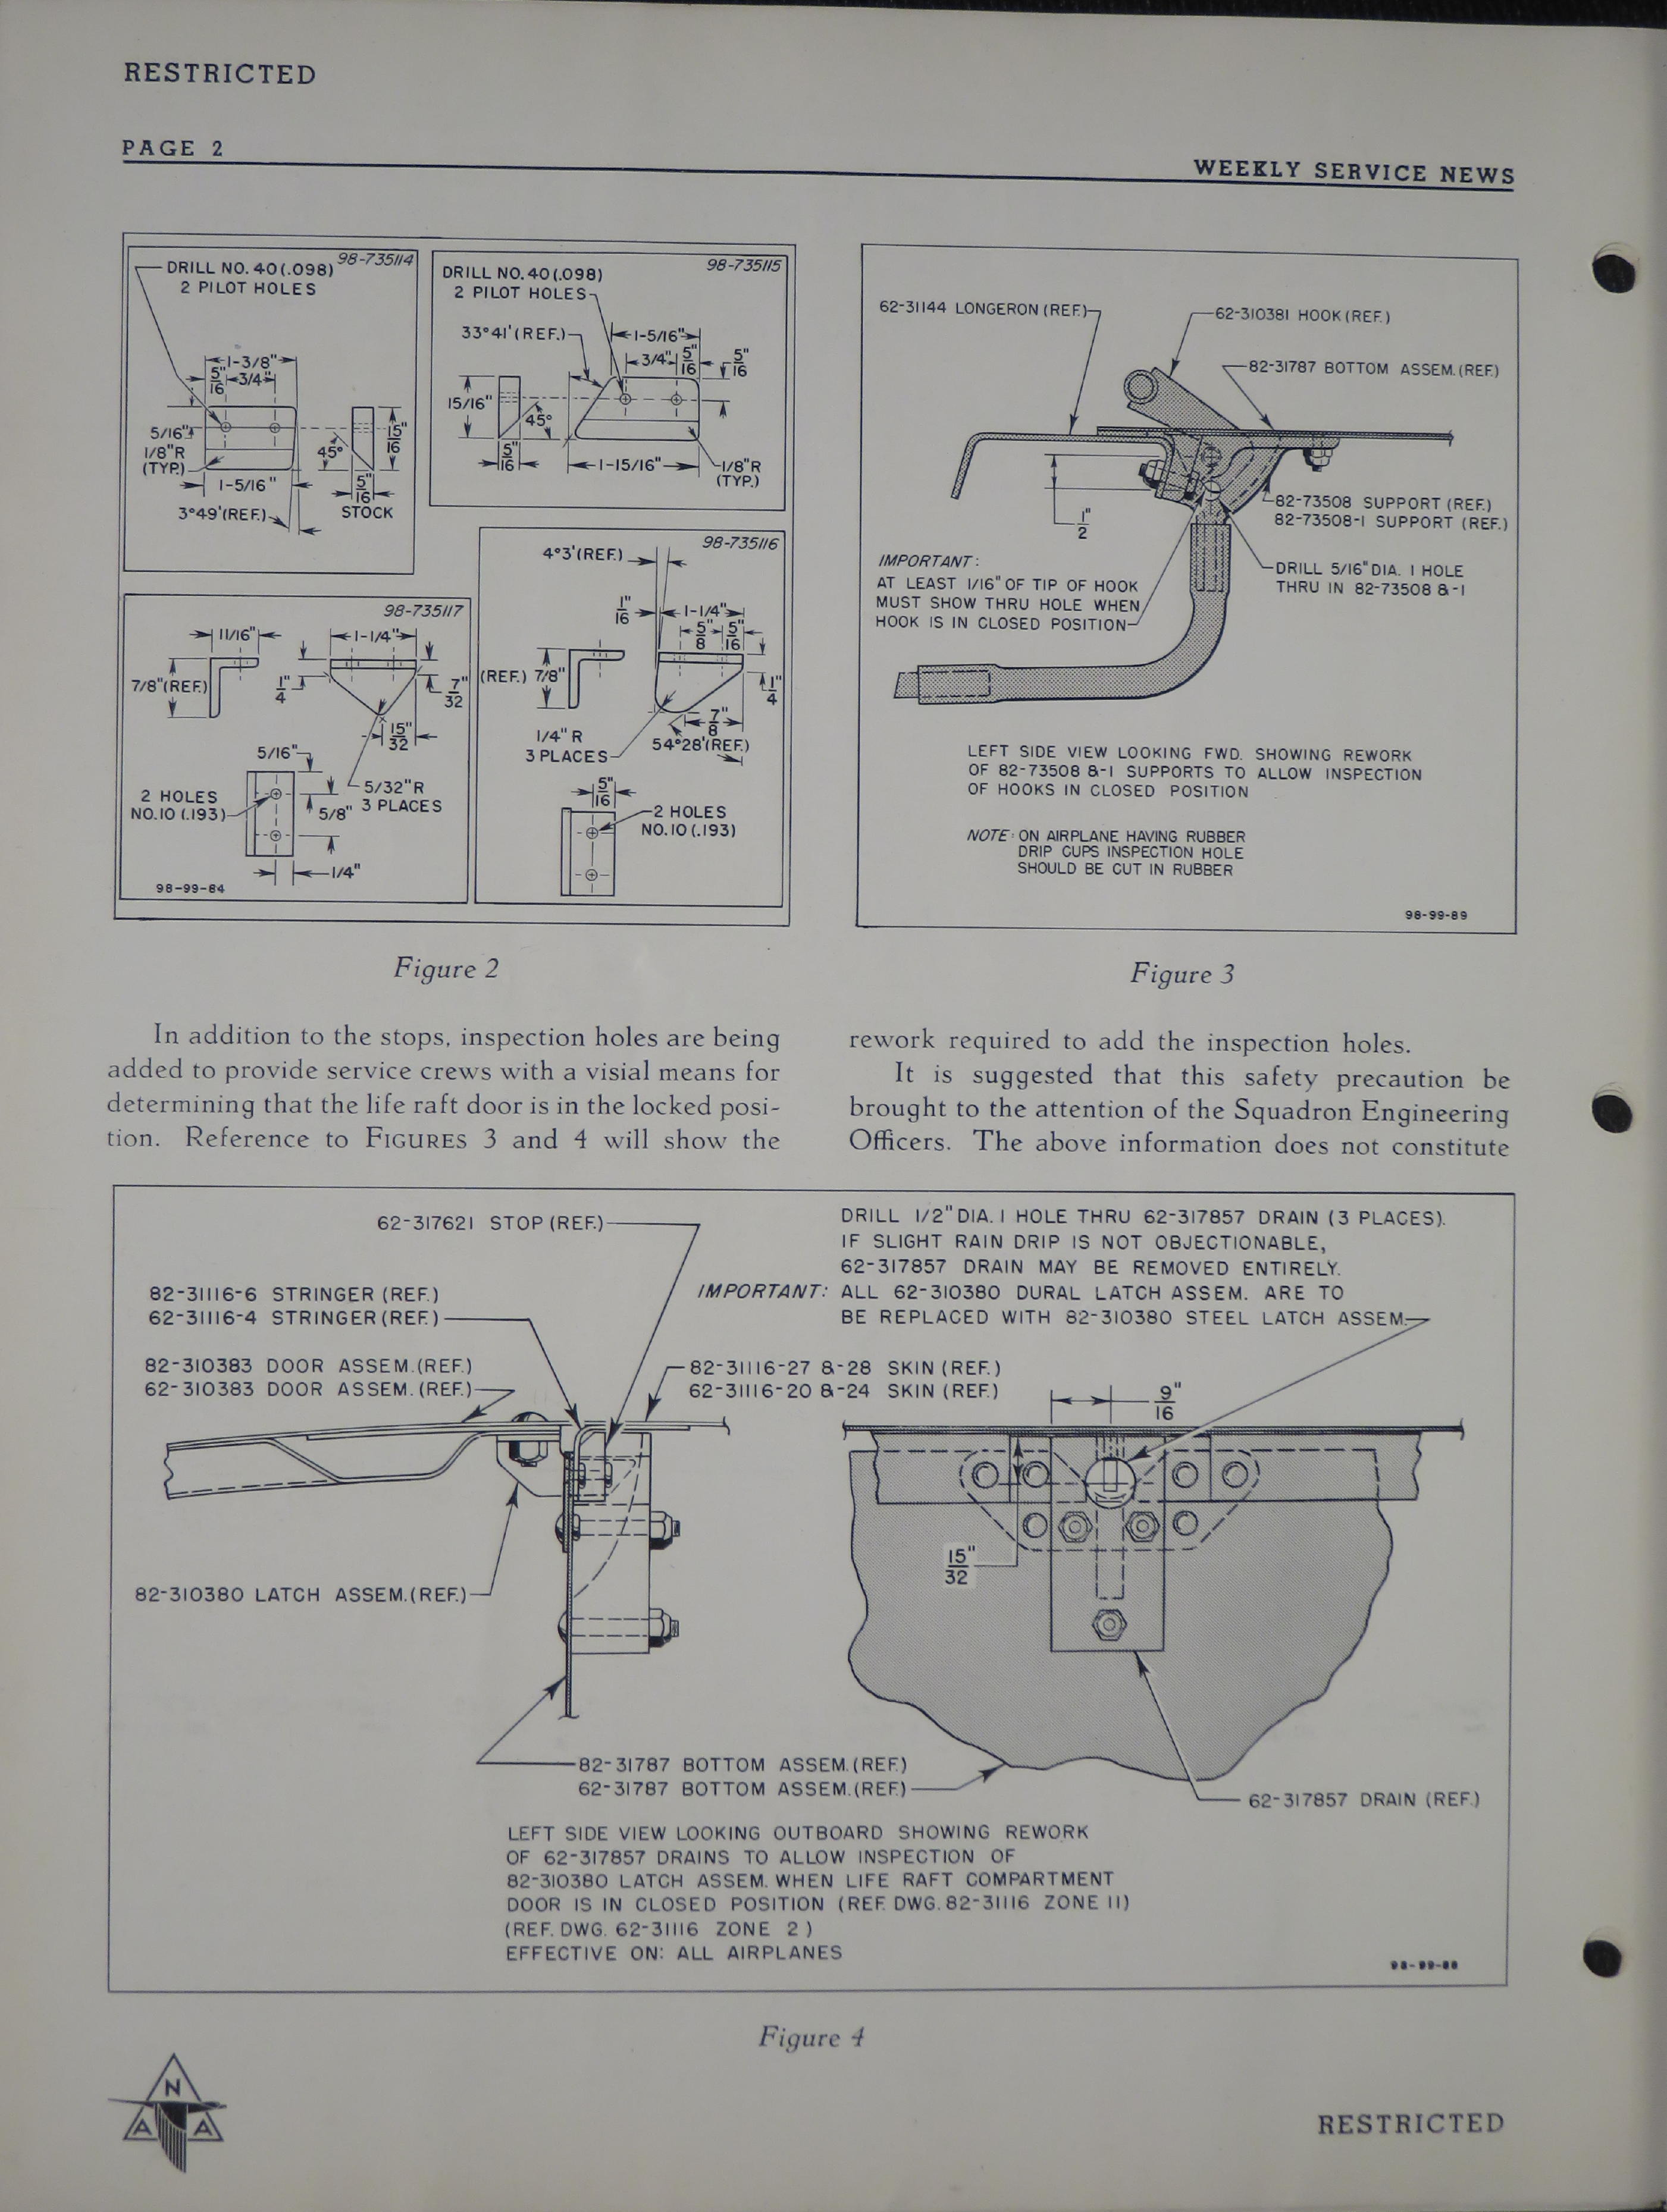 Sample page 2 from AirCorps Library document: Volume 2, No. 5 - Weekly Service News